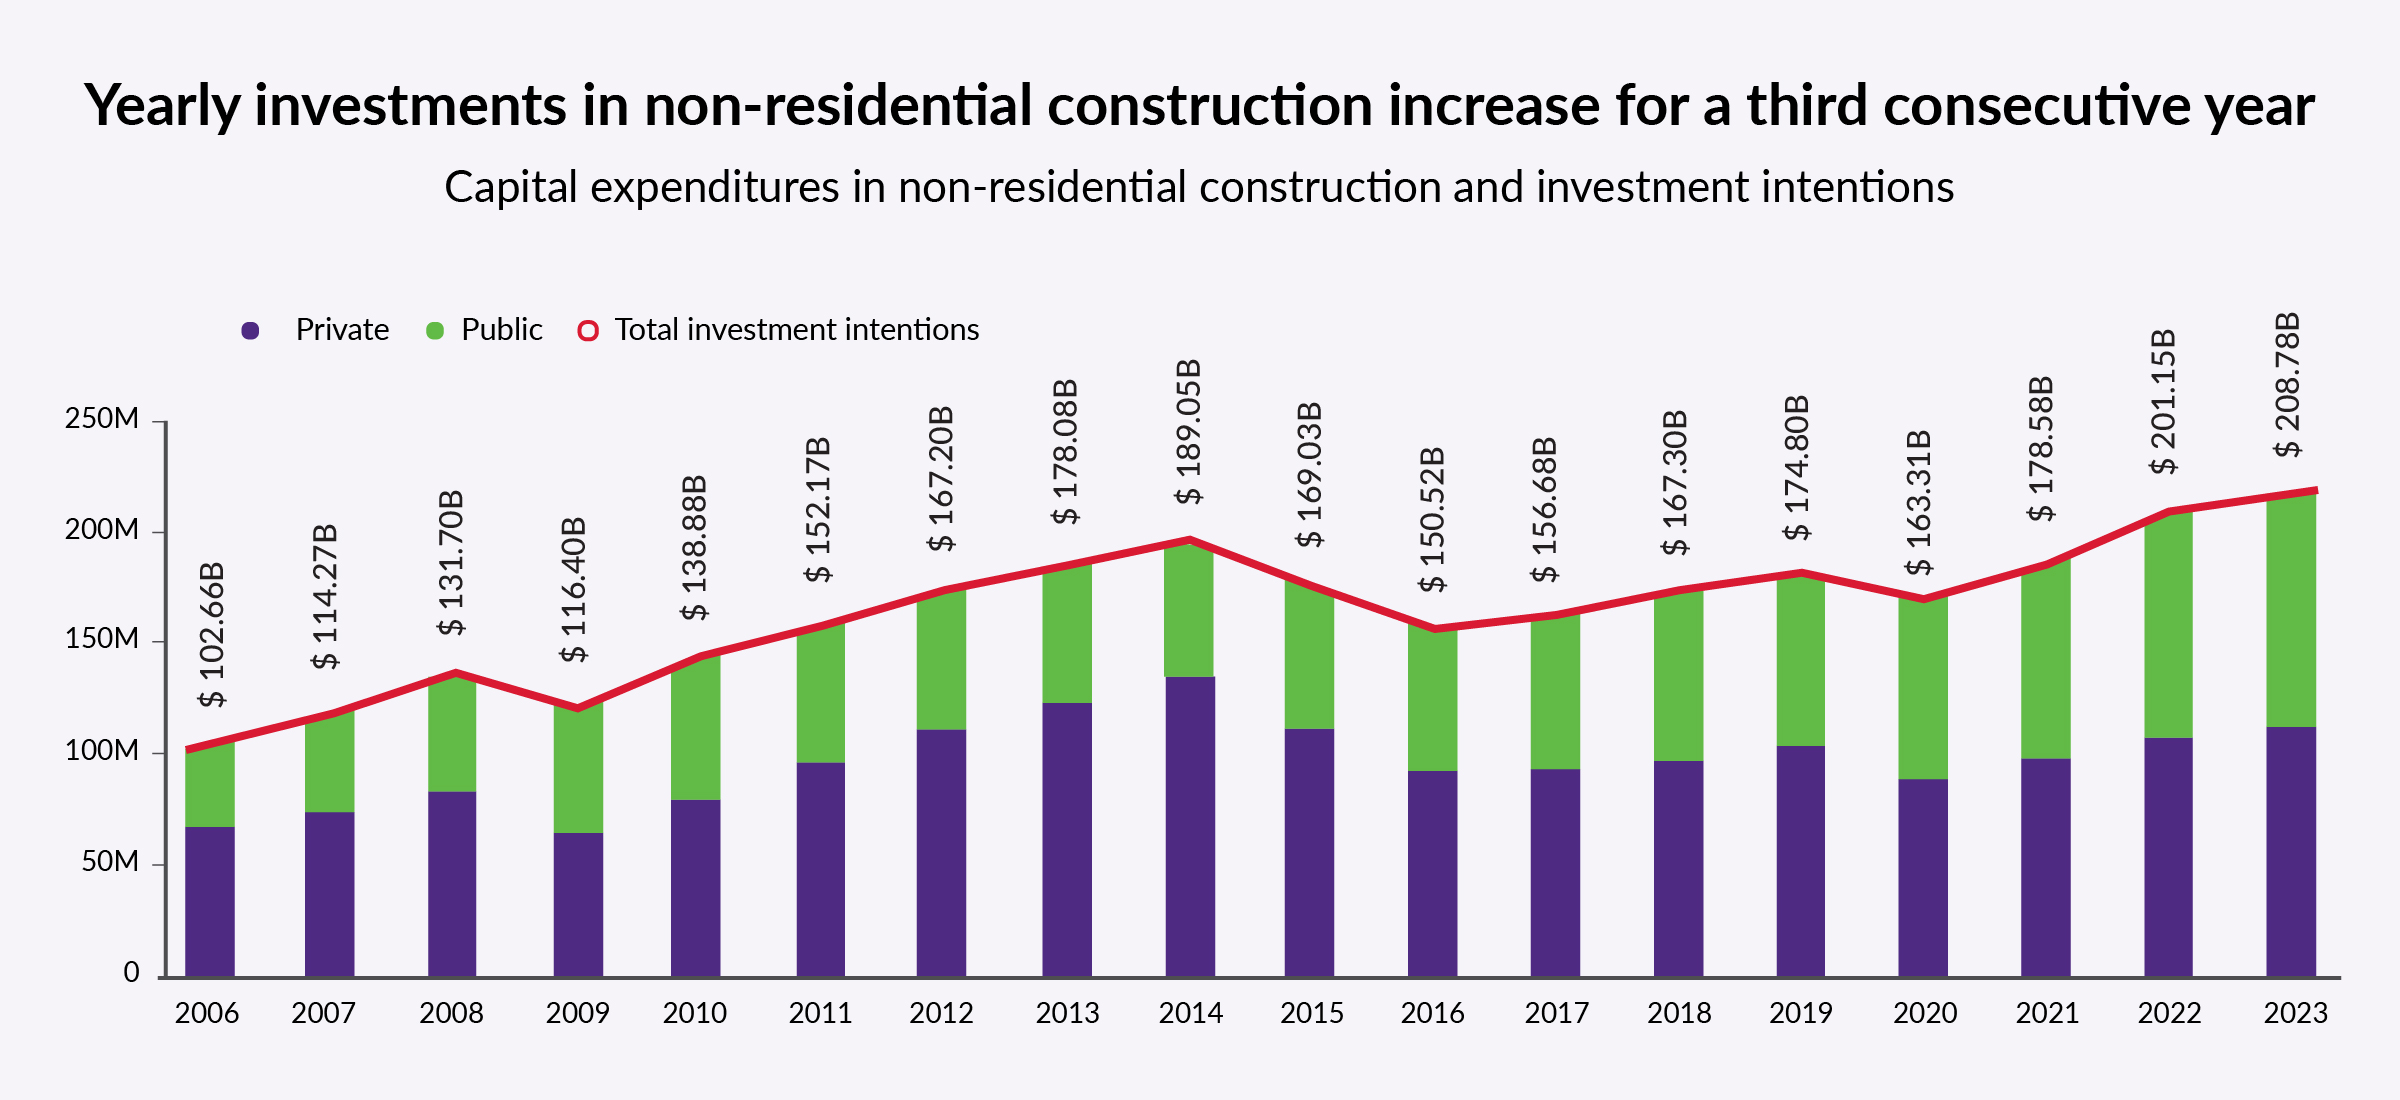 Construction activity remains strong despite challenges faced by the